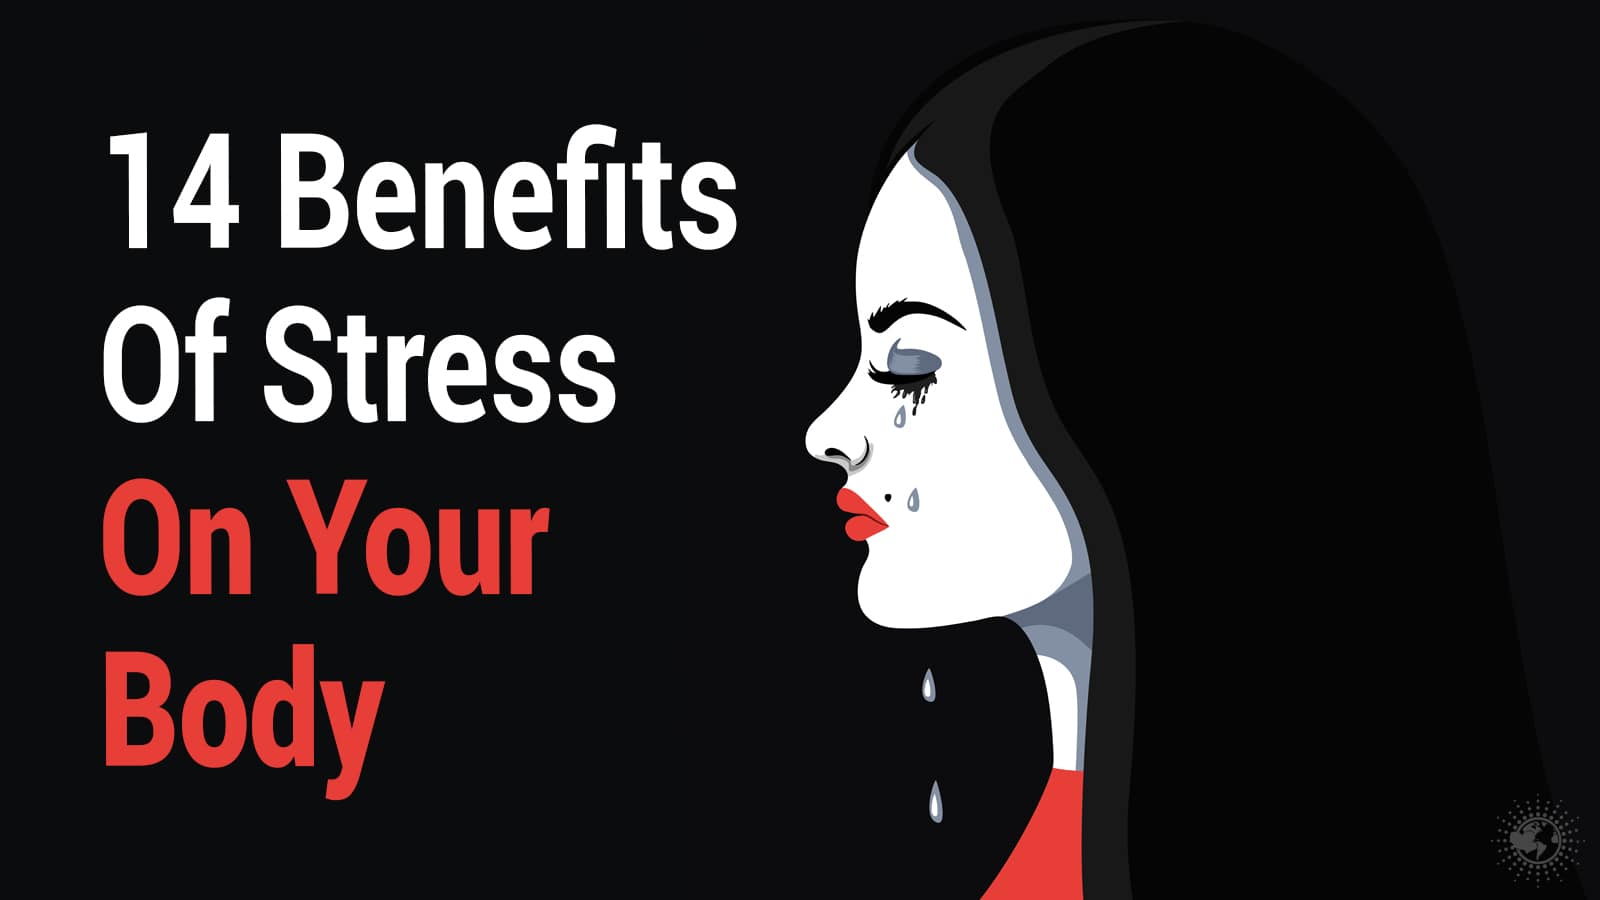 14 Benefits Of Stress On Your Body